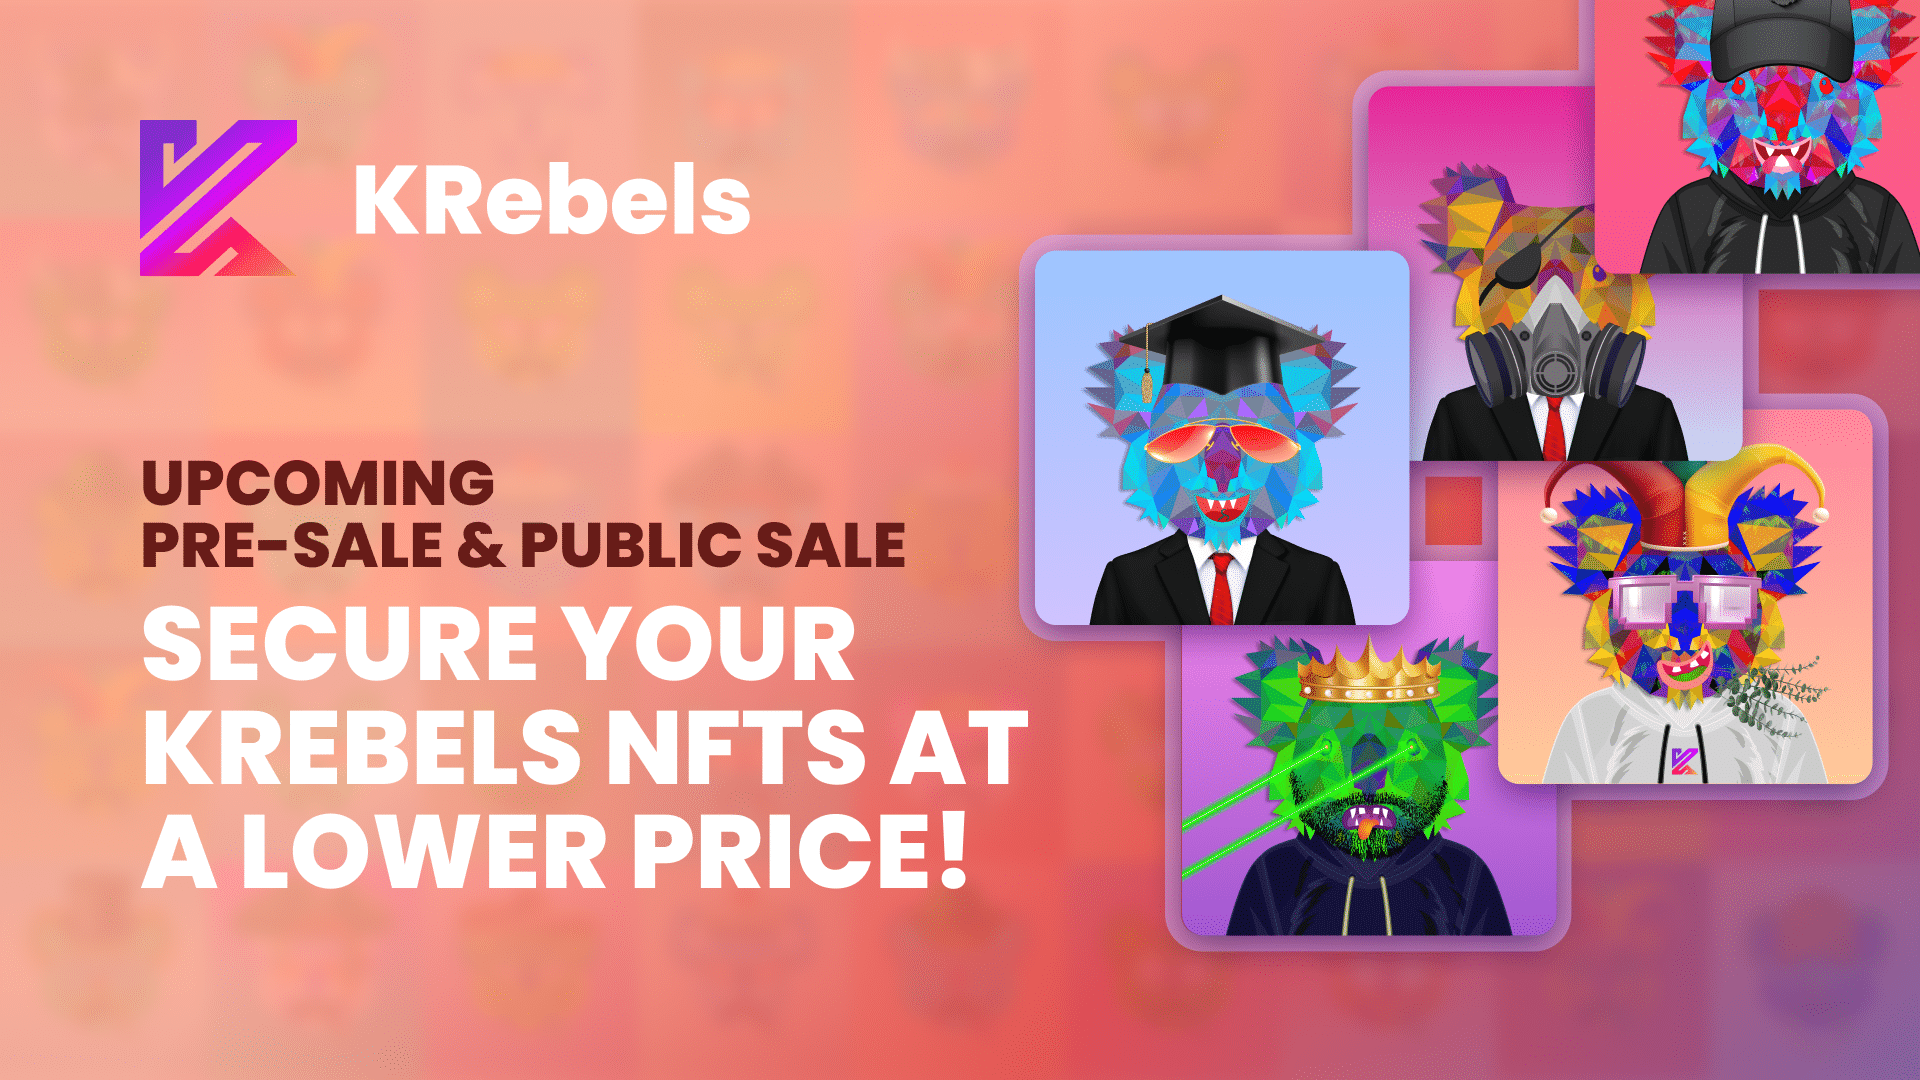 KRebels Pre-Sale and Public Sale is Coming Up. Secure Your KRebels NFTs at a Lower Price!